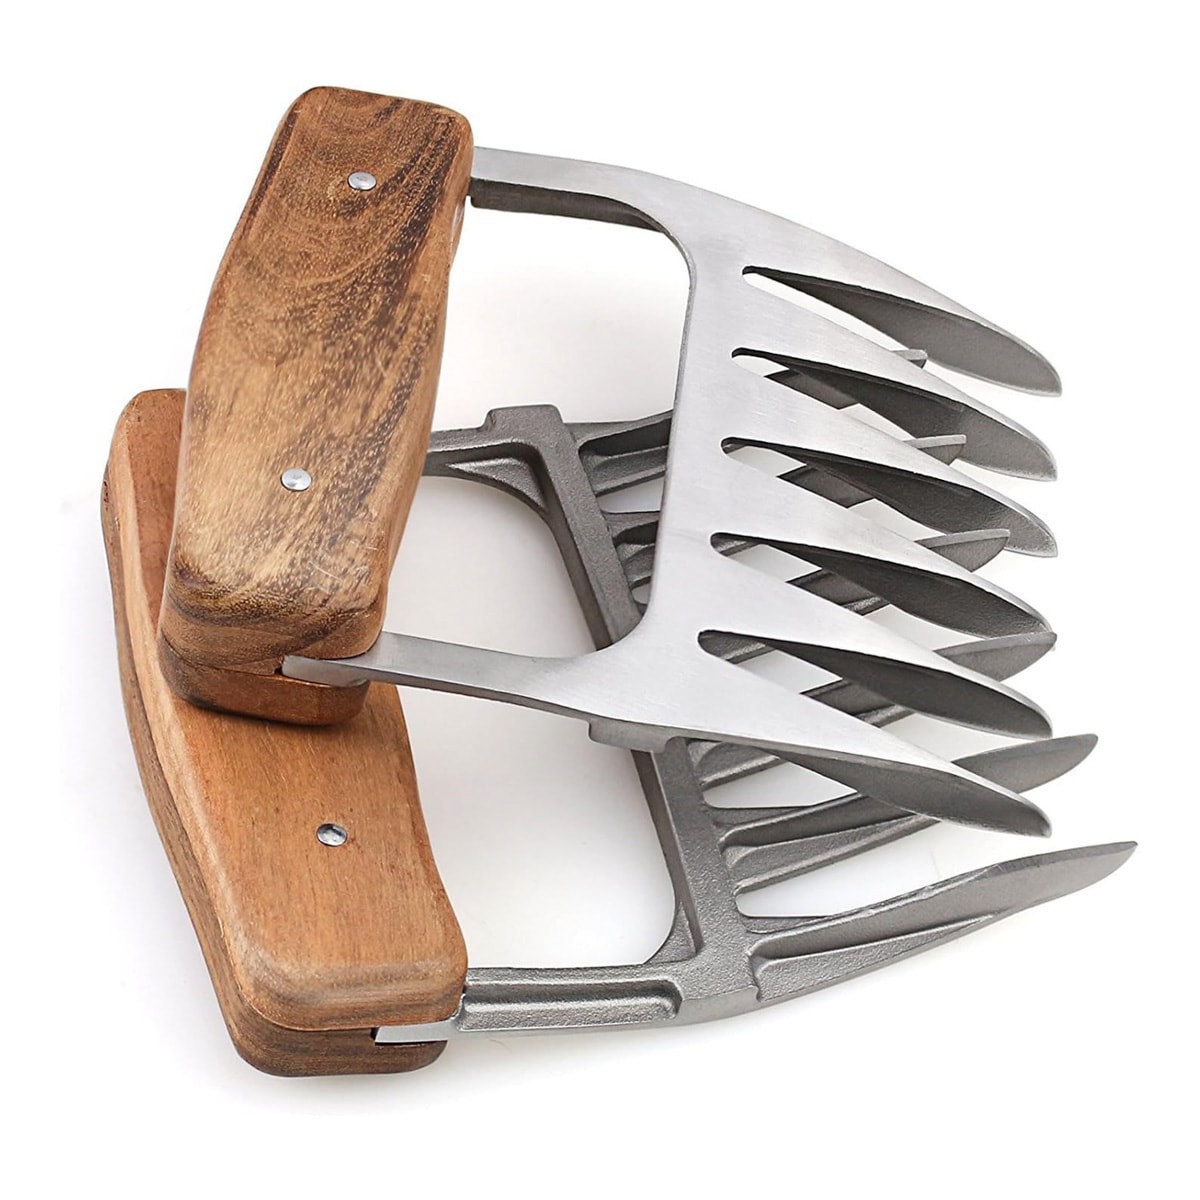 A pair of metal meat shredder claws.